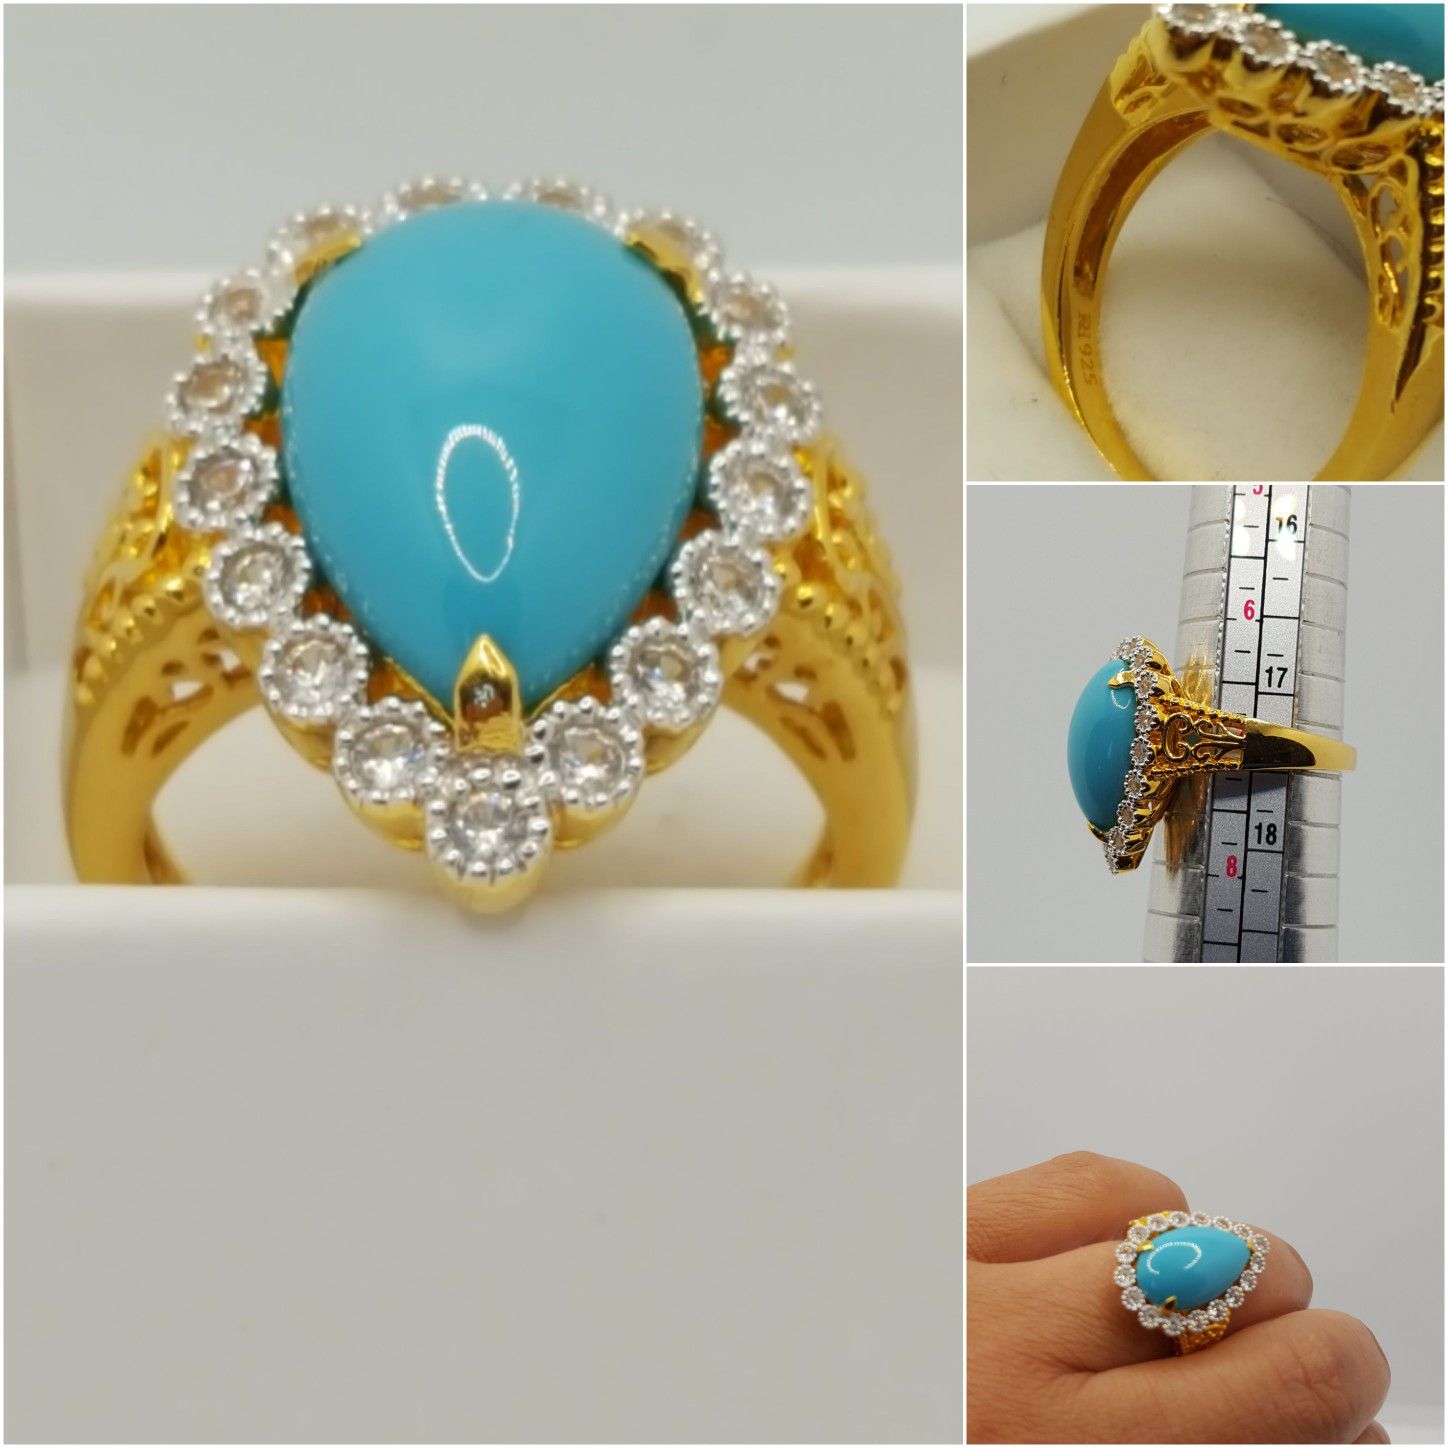 Precious 925 sterling silver, 10k Gold plated Ring, 7.00grs, Size7, Crystal and turquoise Stone. Nwot.